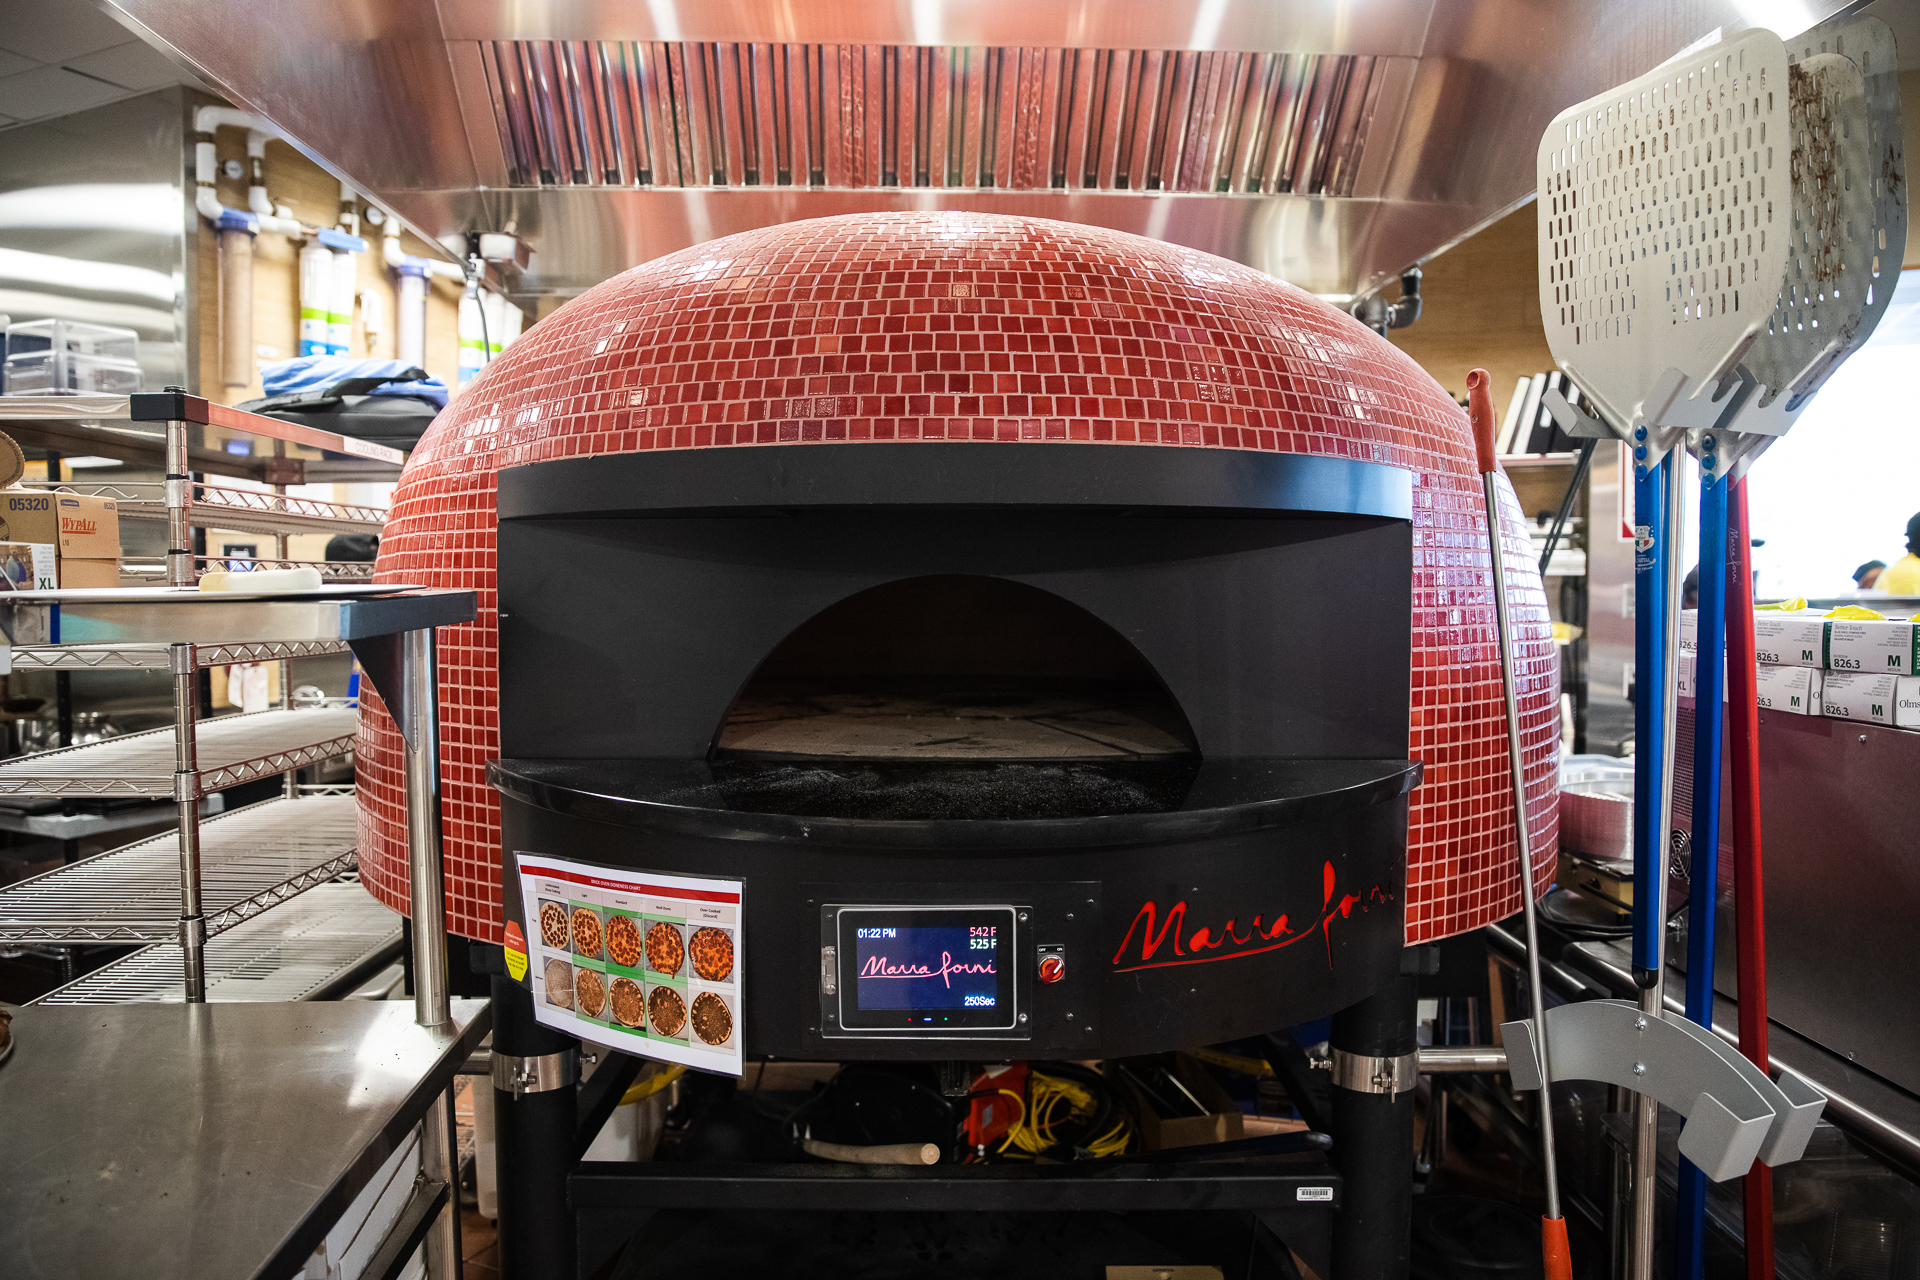  It takes about four minutes to bake a pizza in this oven. Eagle photo by Paul Frangipane